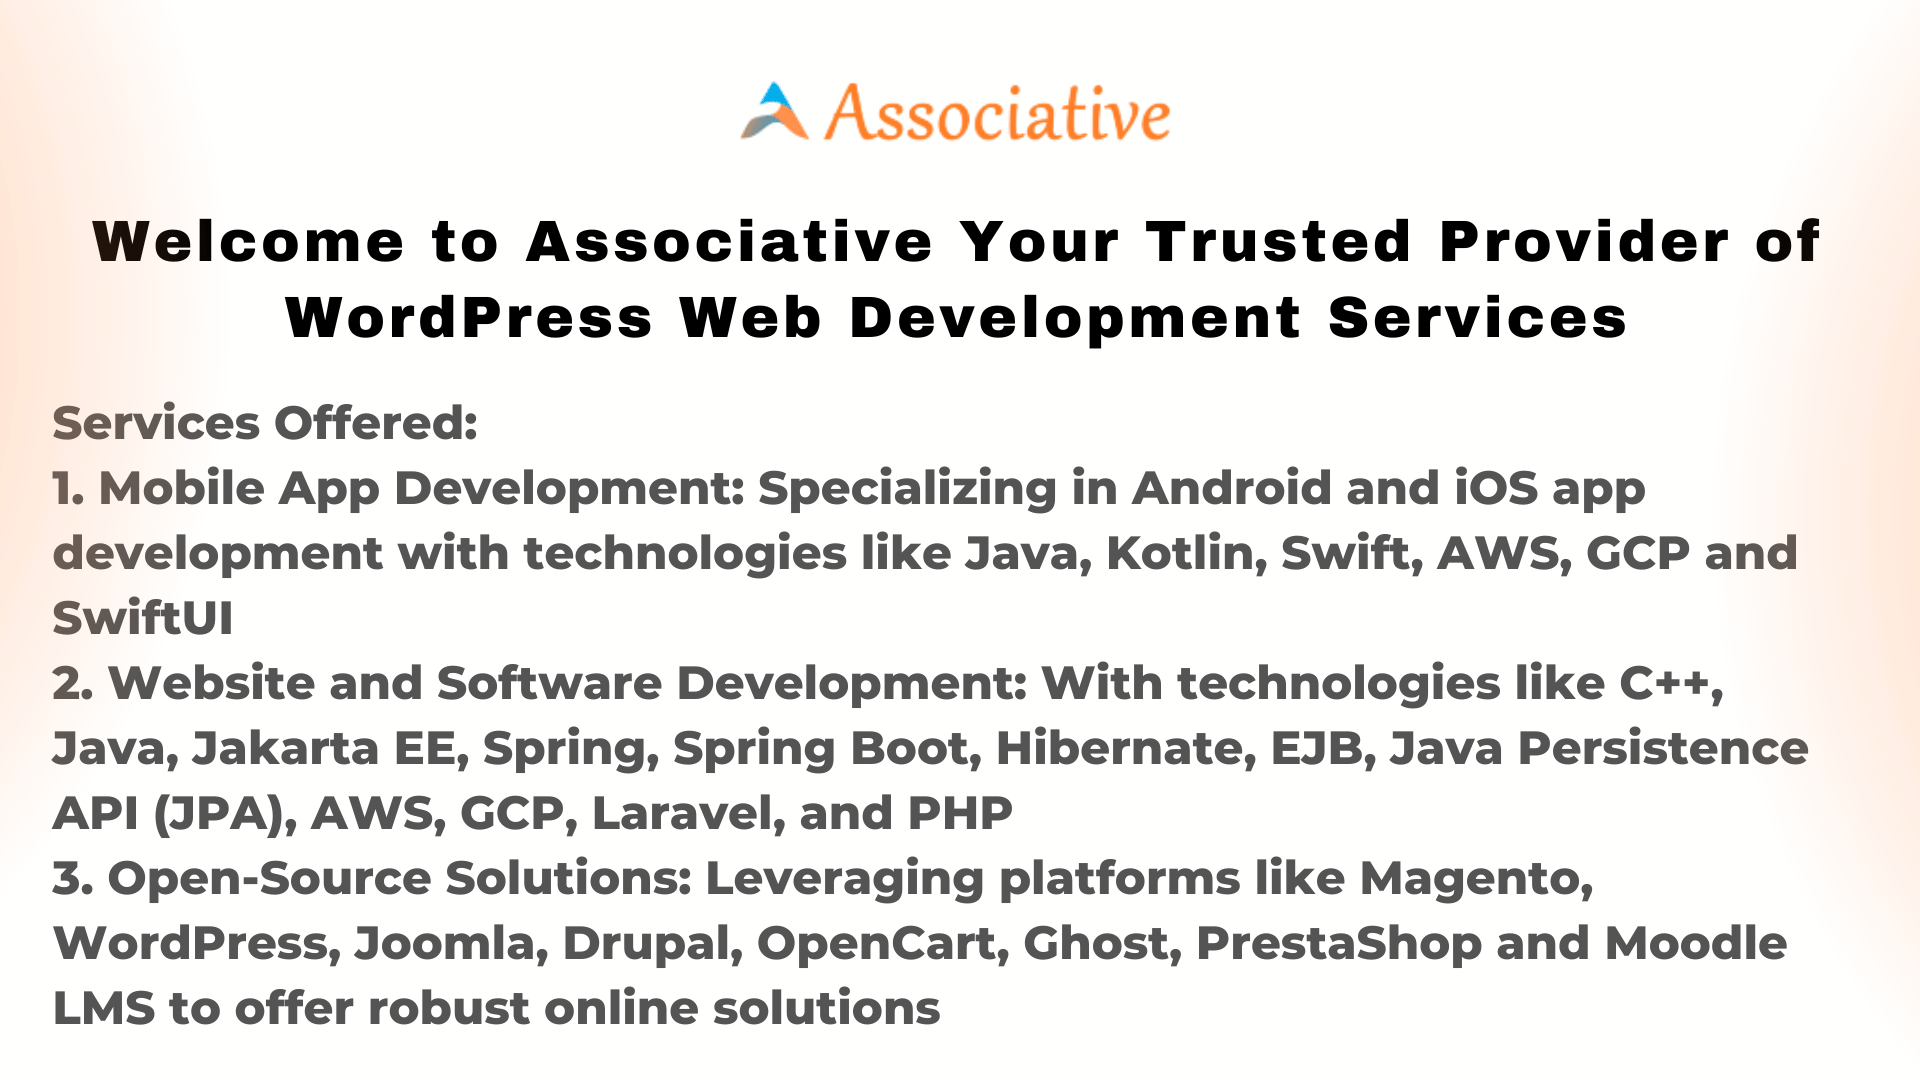 Welcome to Associative Your Trusted Provider of WordPress Web Development Services